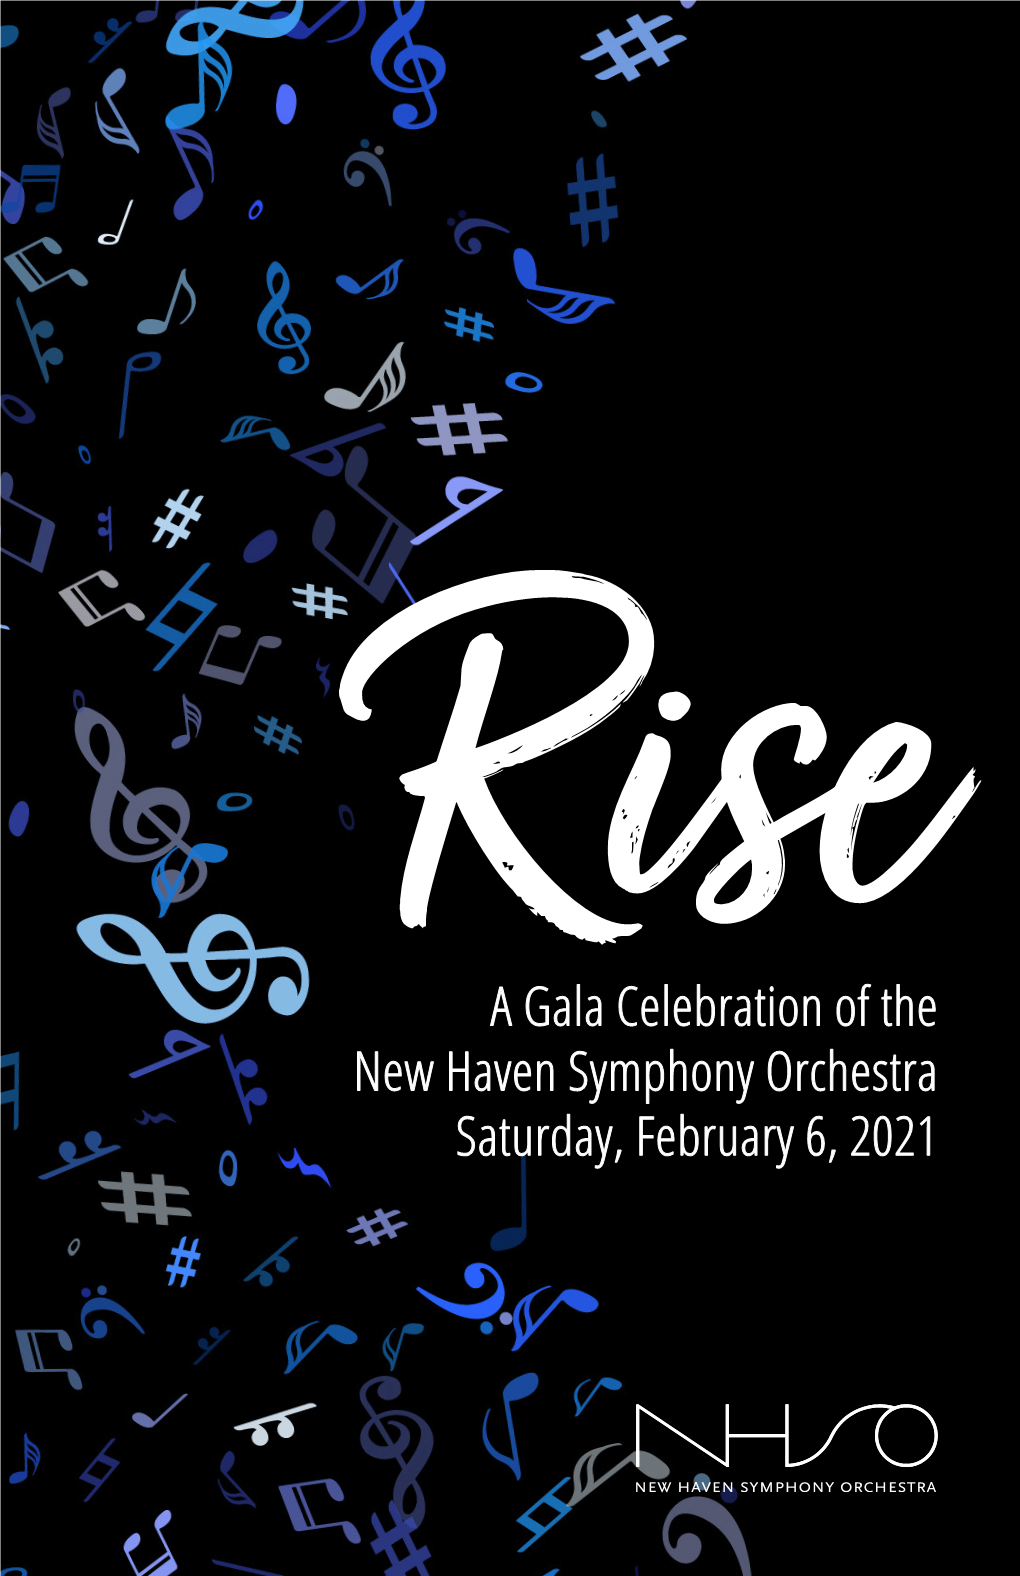 Risea Gala Celebration of the New Haven Symphony Orchestra